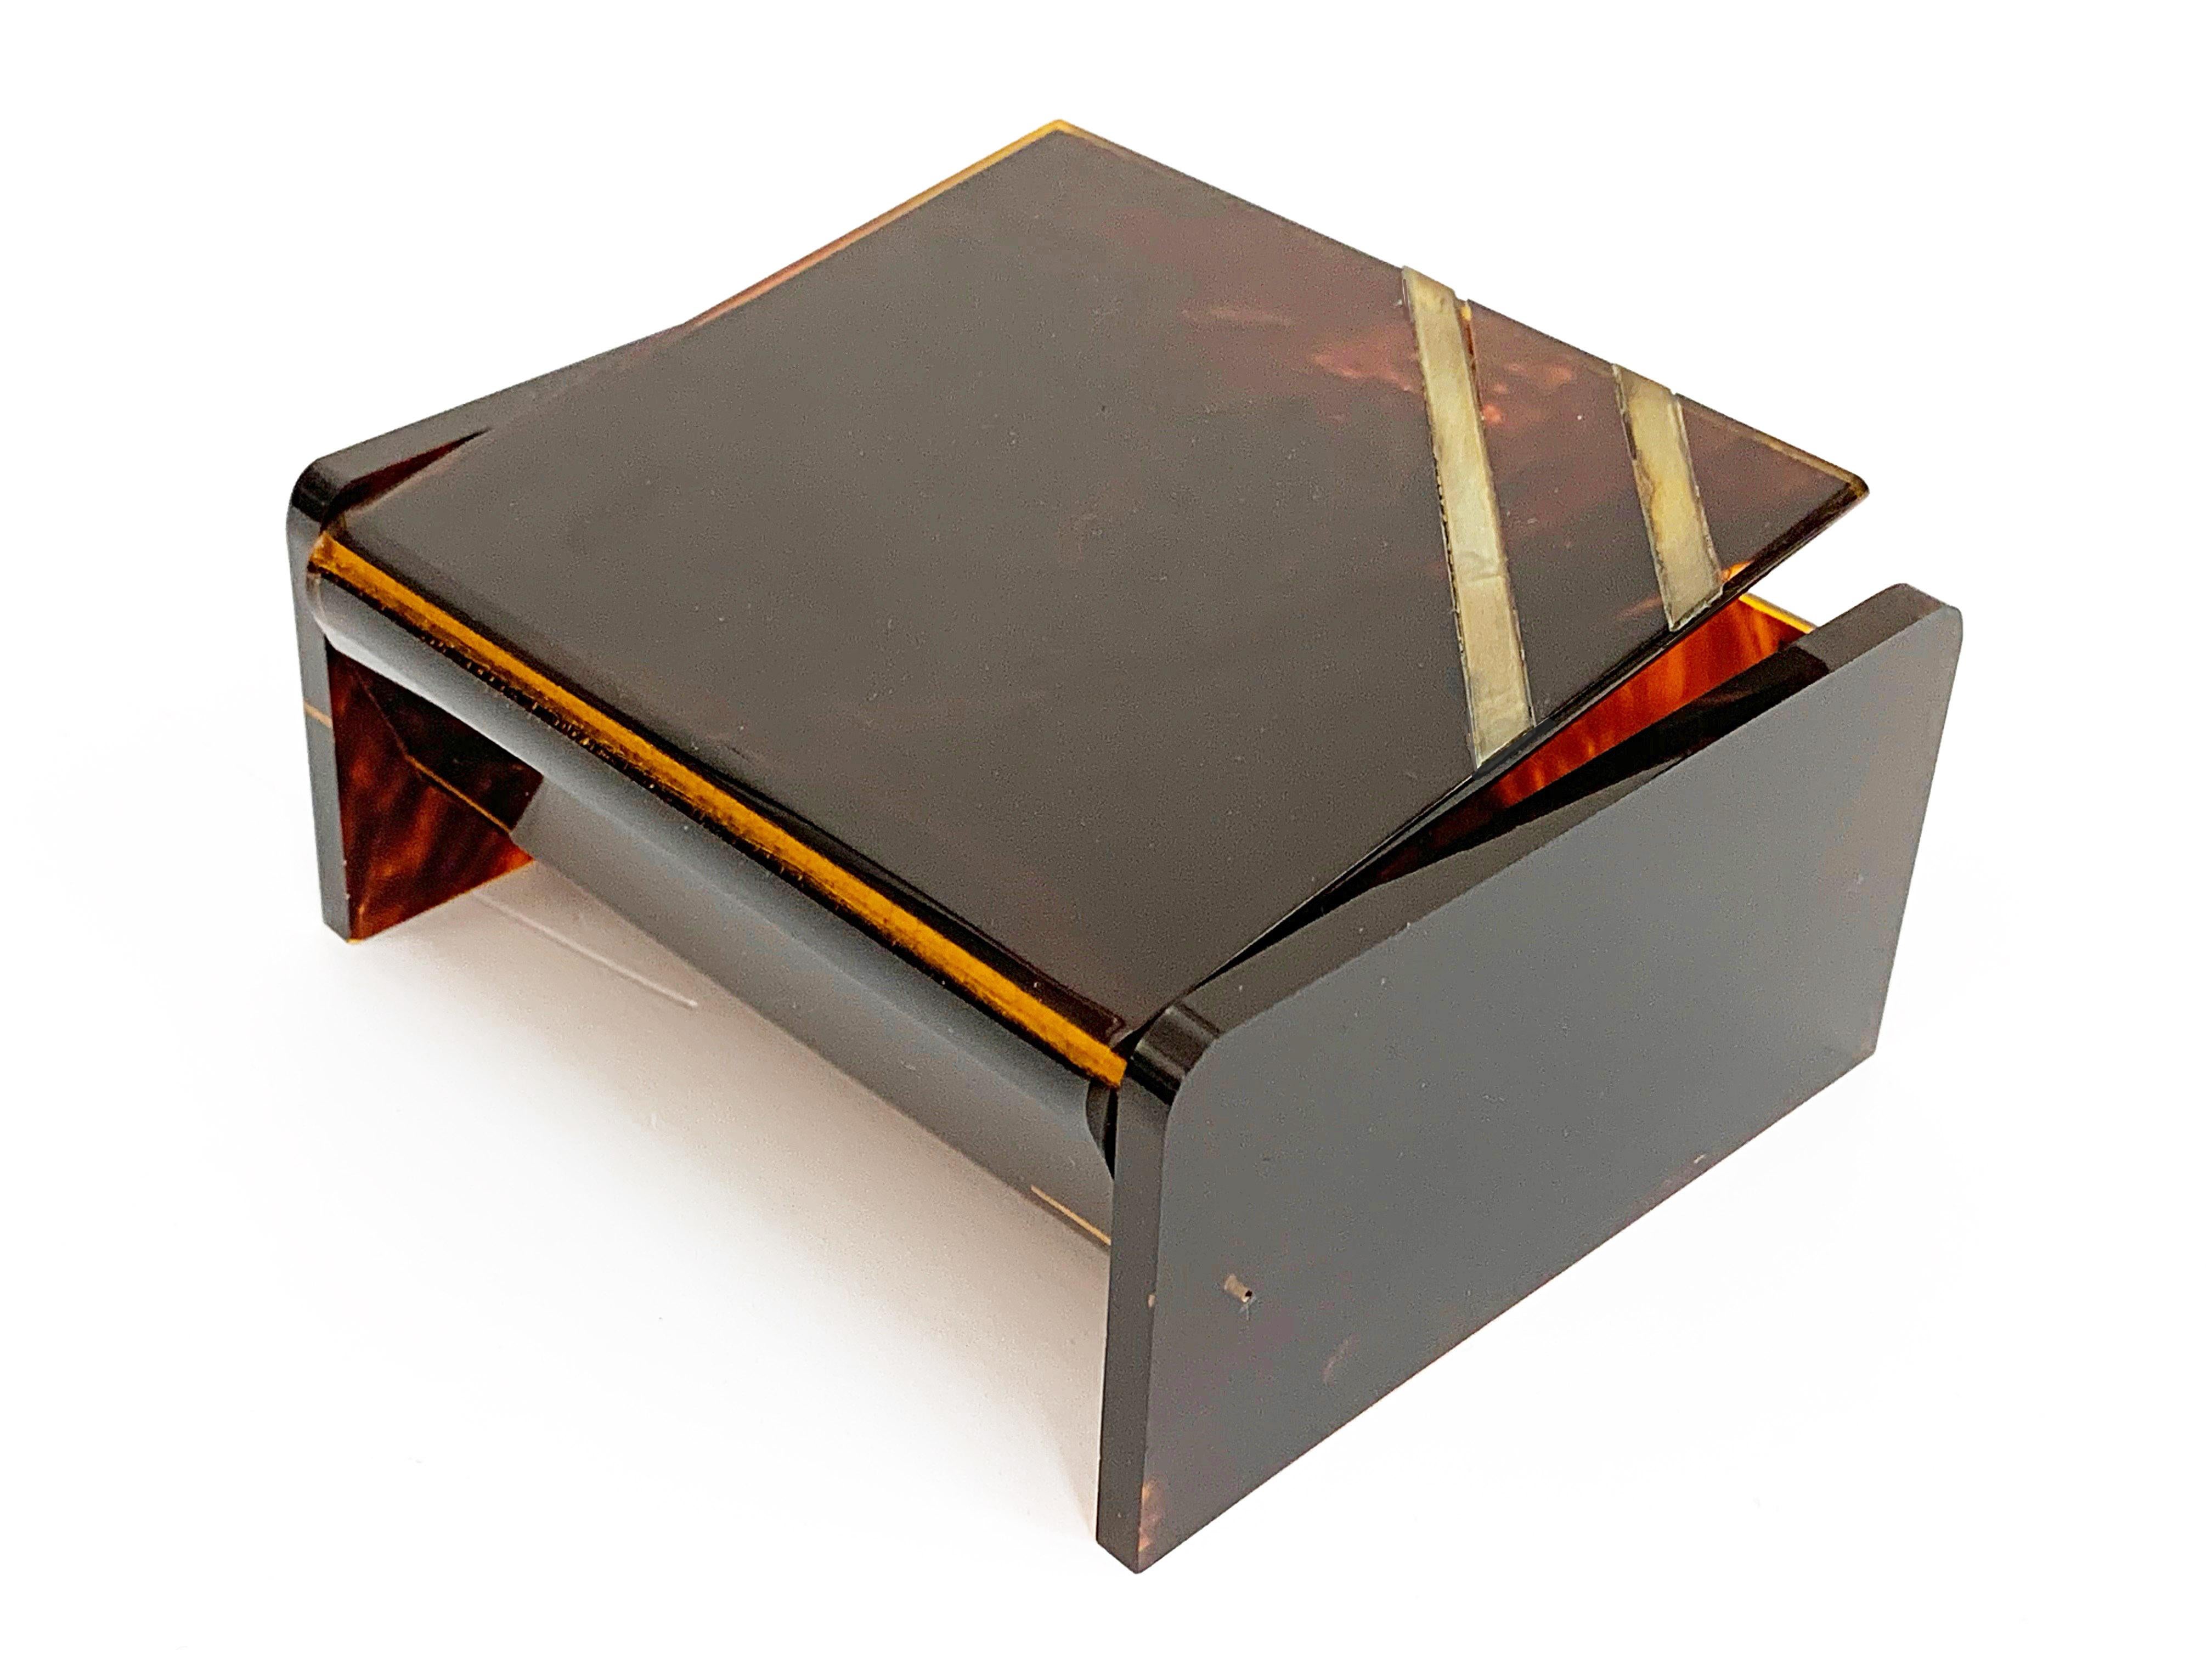 French Midcentury Lucite, Tortoise Plexiglass and Brass Christian Dior Jewelry Box 1970 For Sale